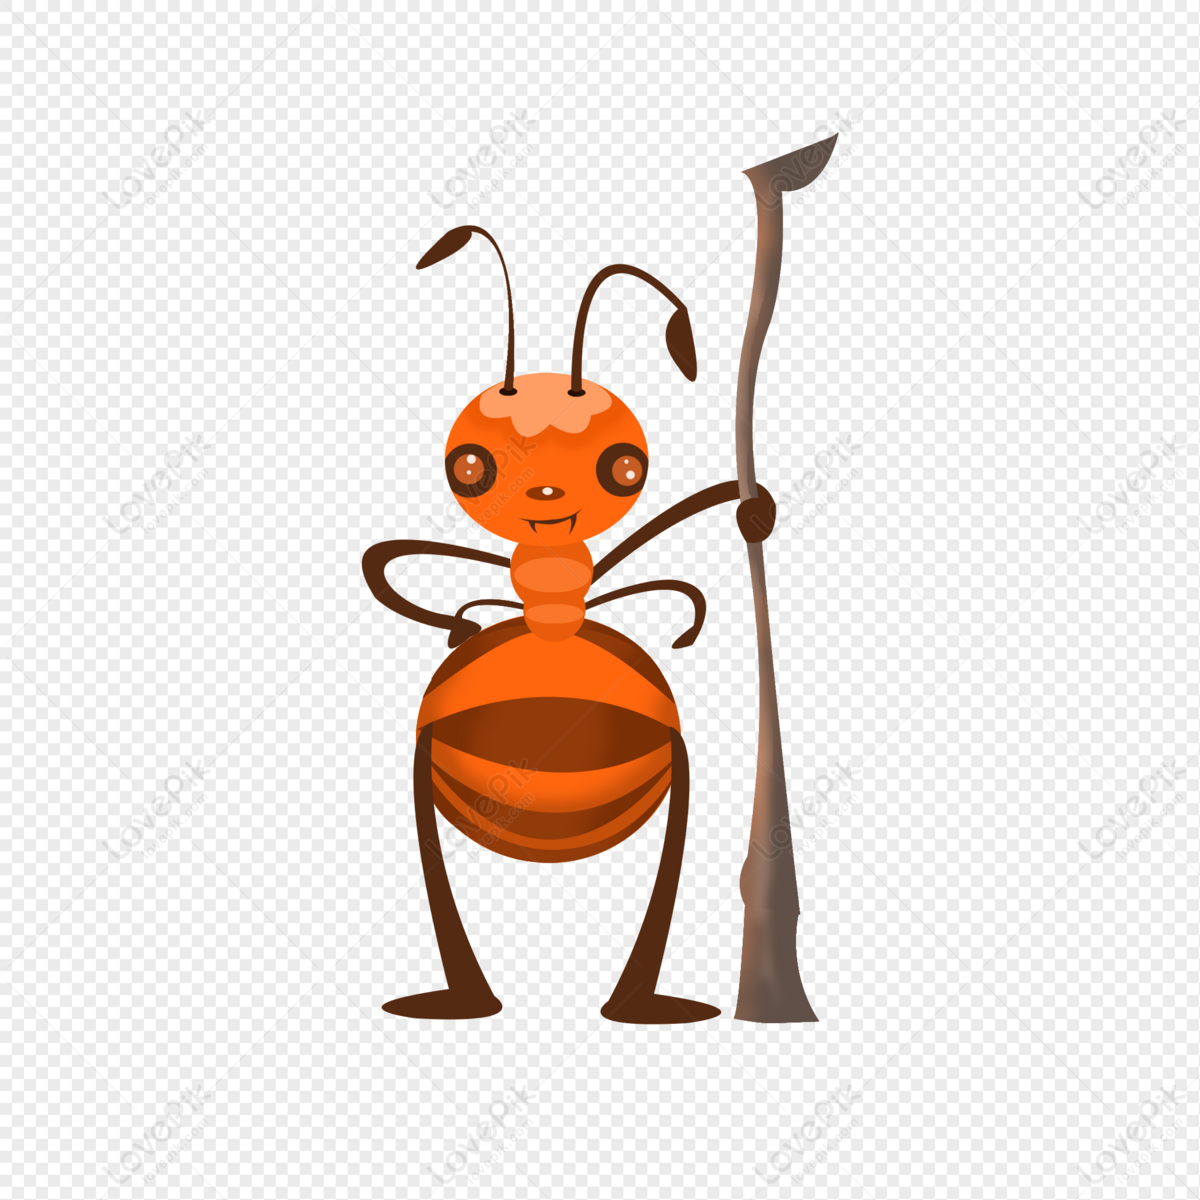 Ant PNG Free Download And Clipart Image For Free Download - Lovepik |  401570043